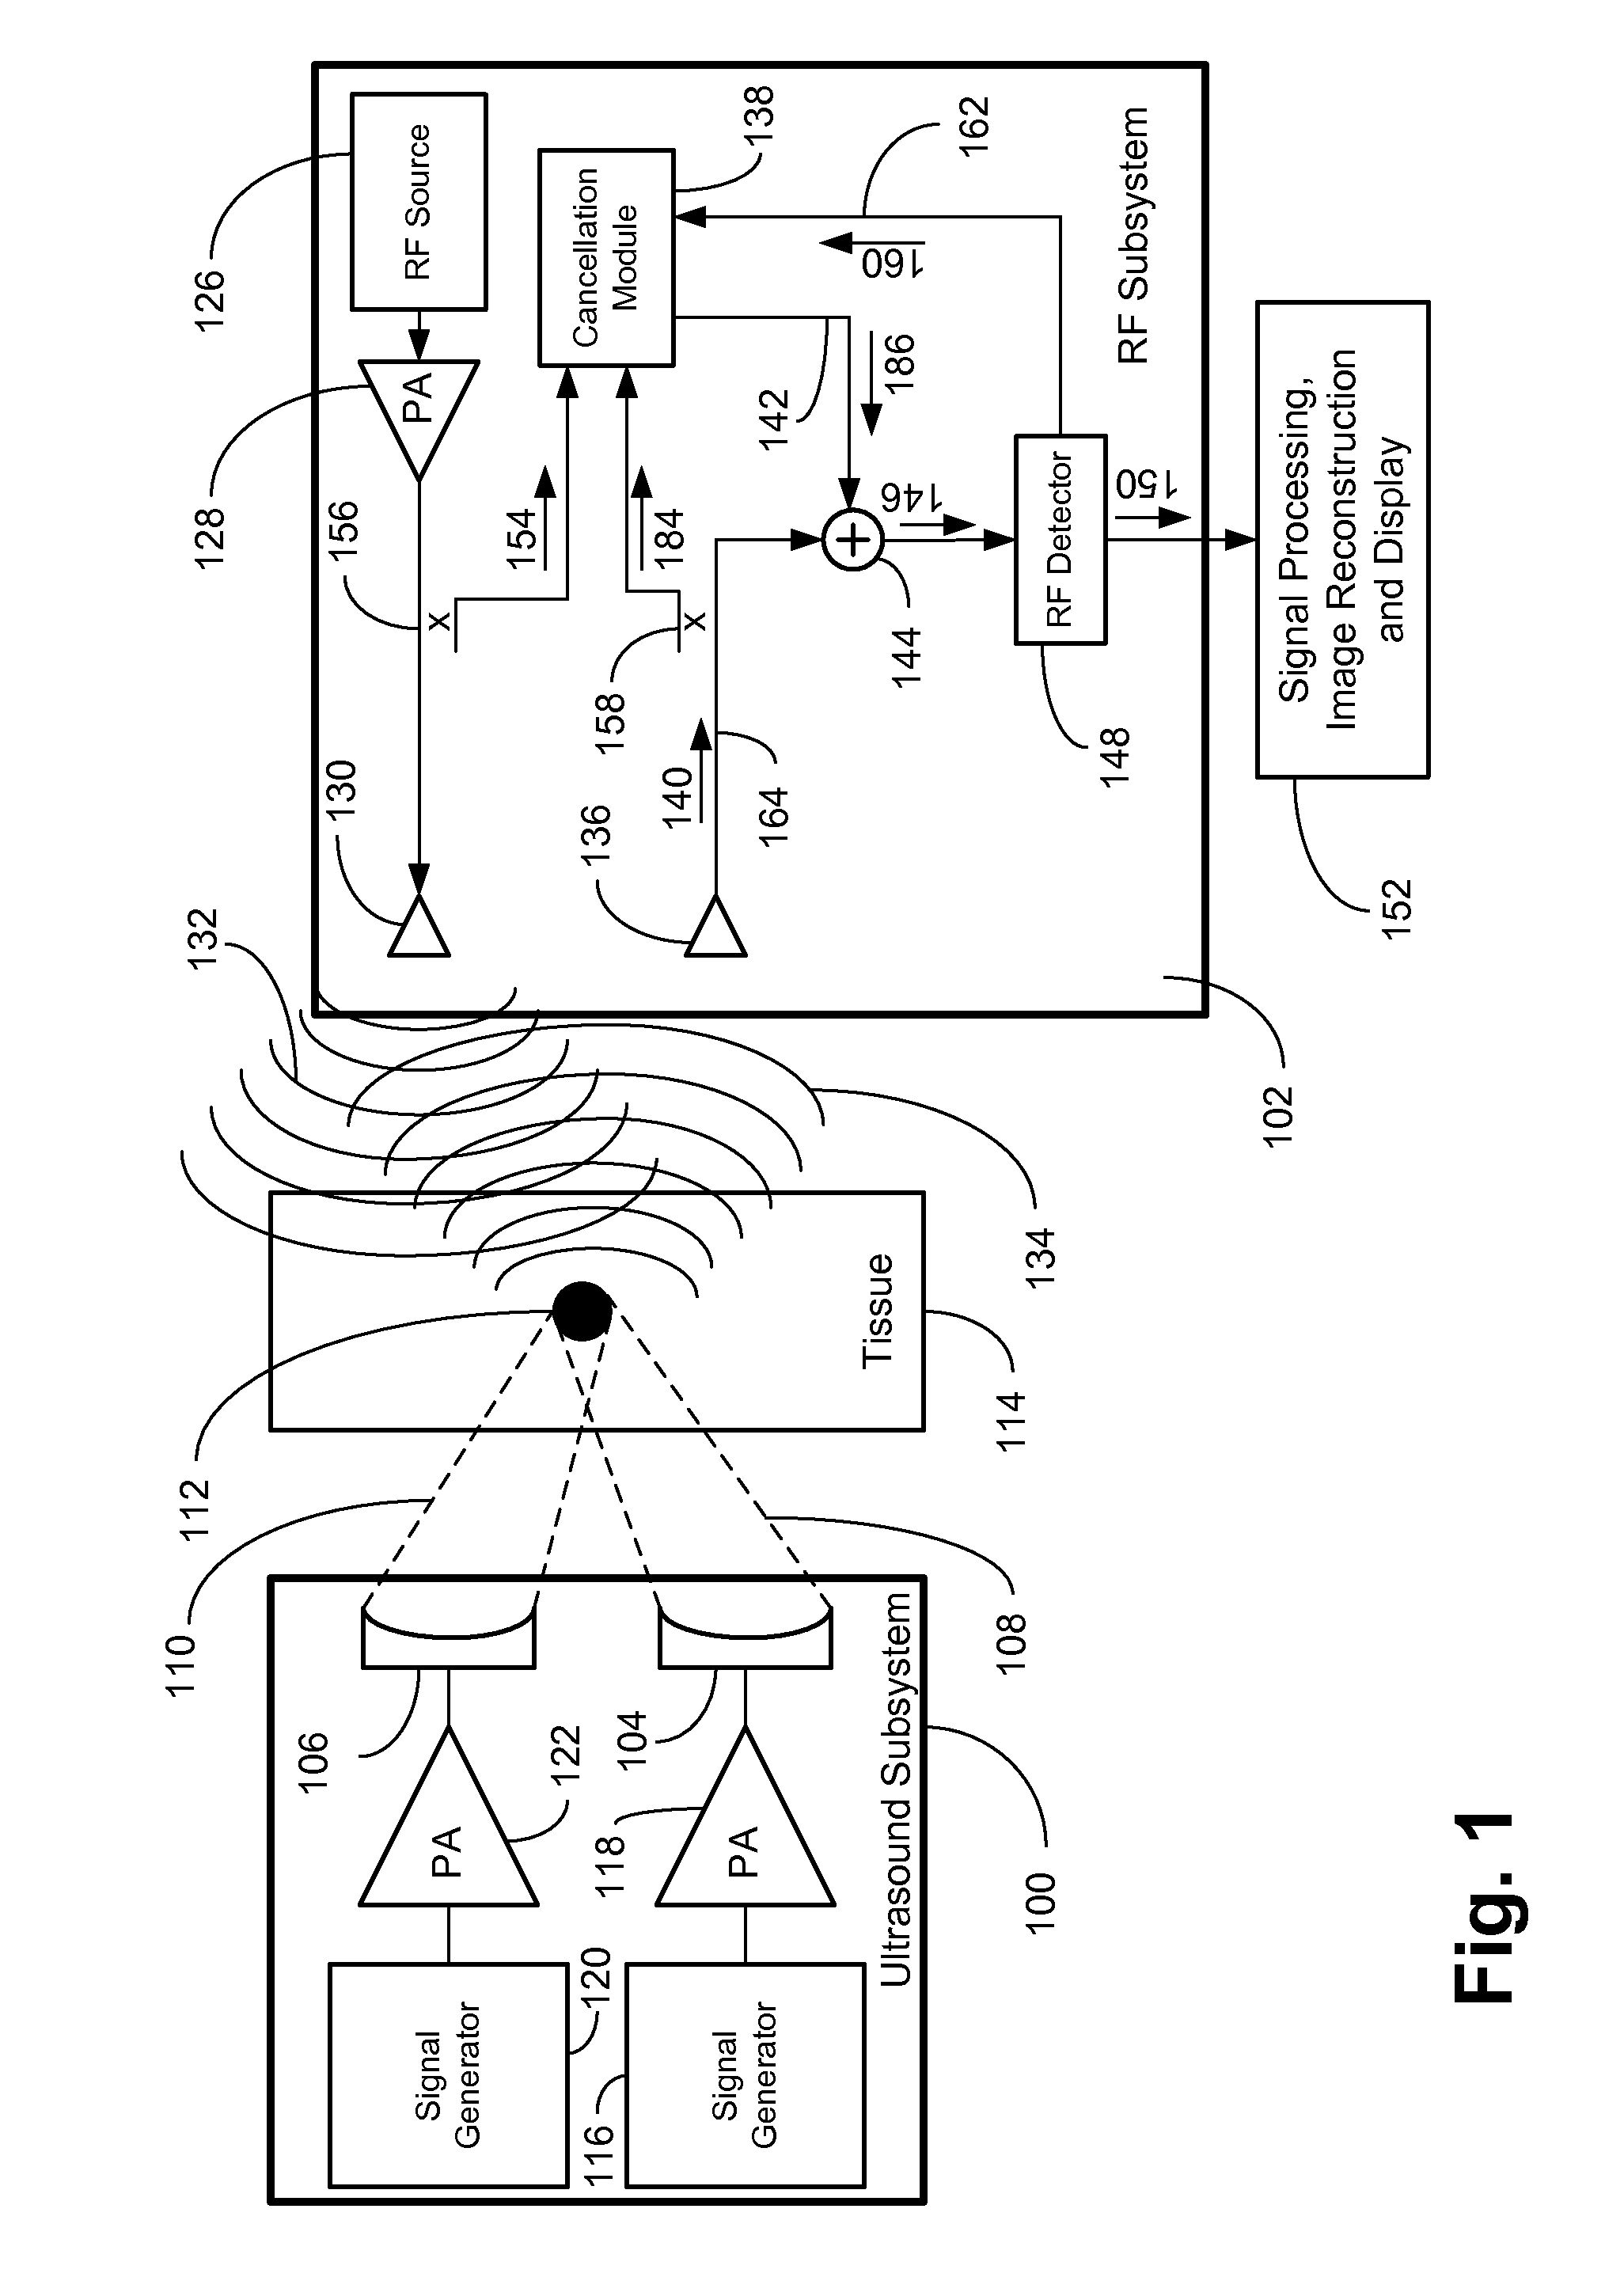 Multi-Modality Ultrasound and Radio Frequency System for Imaging Tissue